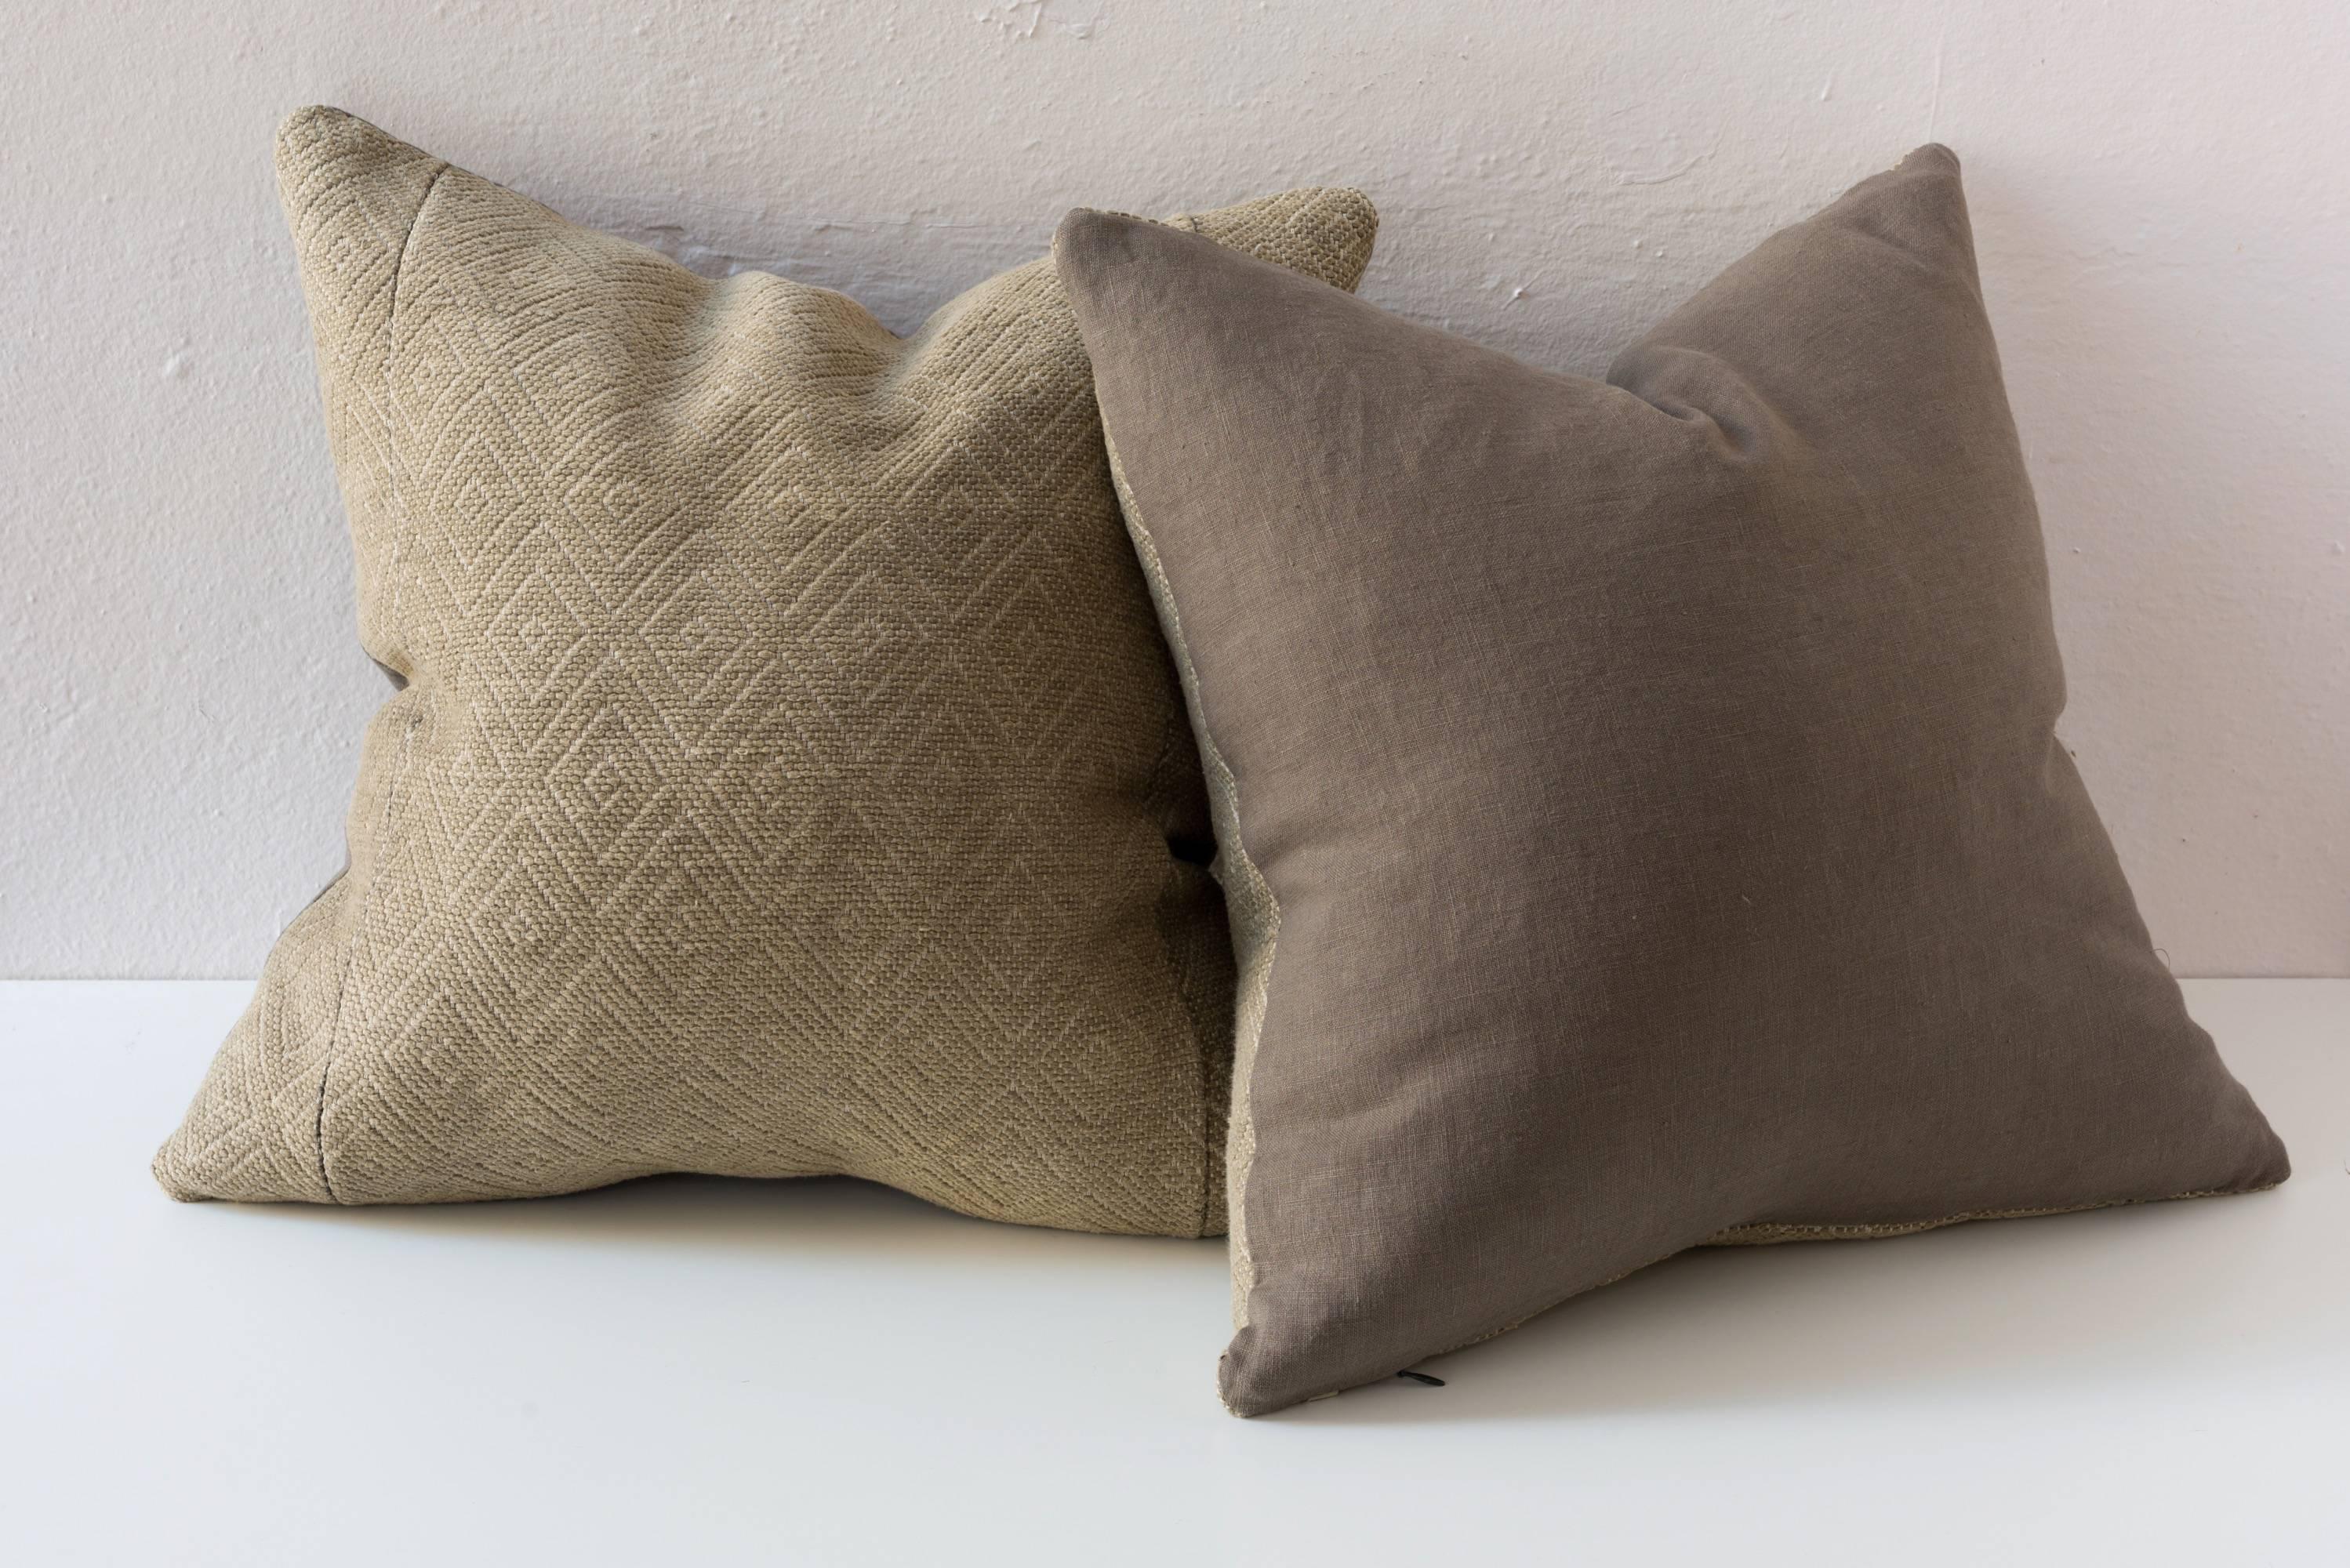 Vintage dowry textile cushion in a pale green grey handwoven in a diamond pattern. Four pillows available. 

Linen on reverse-see image
75/25 goose feather and down inserts.
Concealed zippers.
Check our 1stdibs storefront for pillows in coordinating